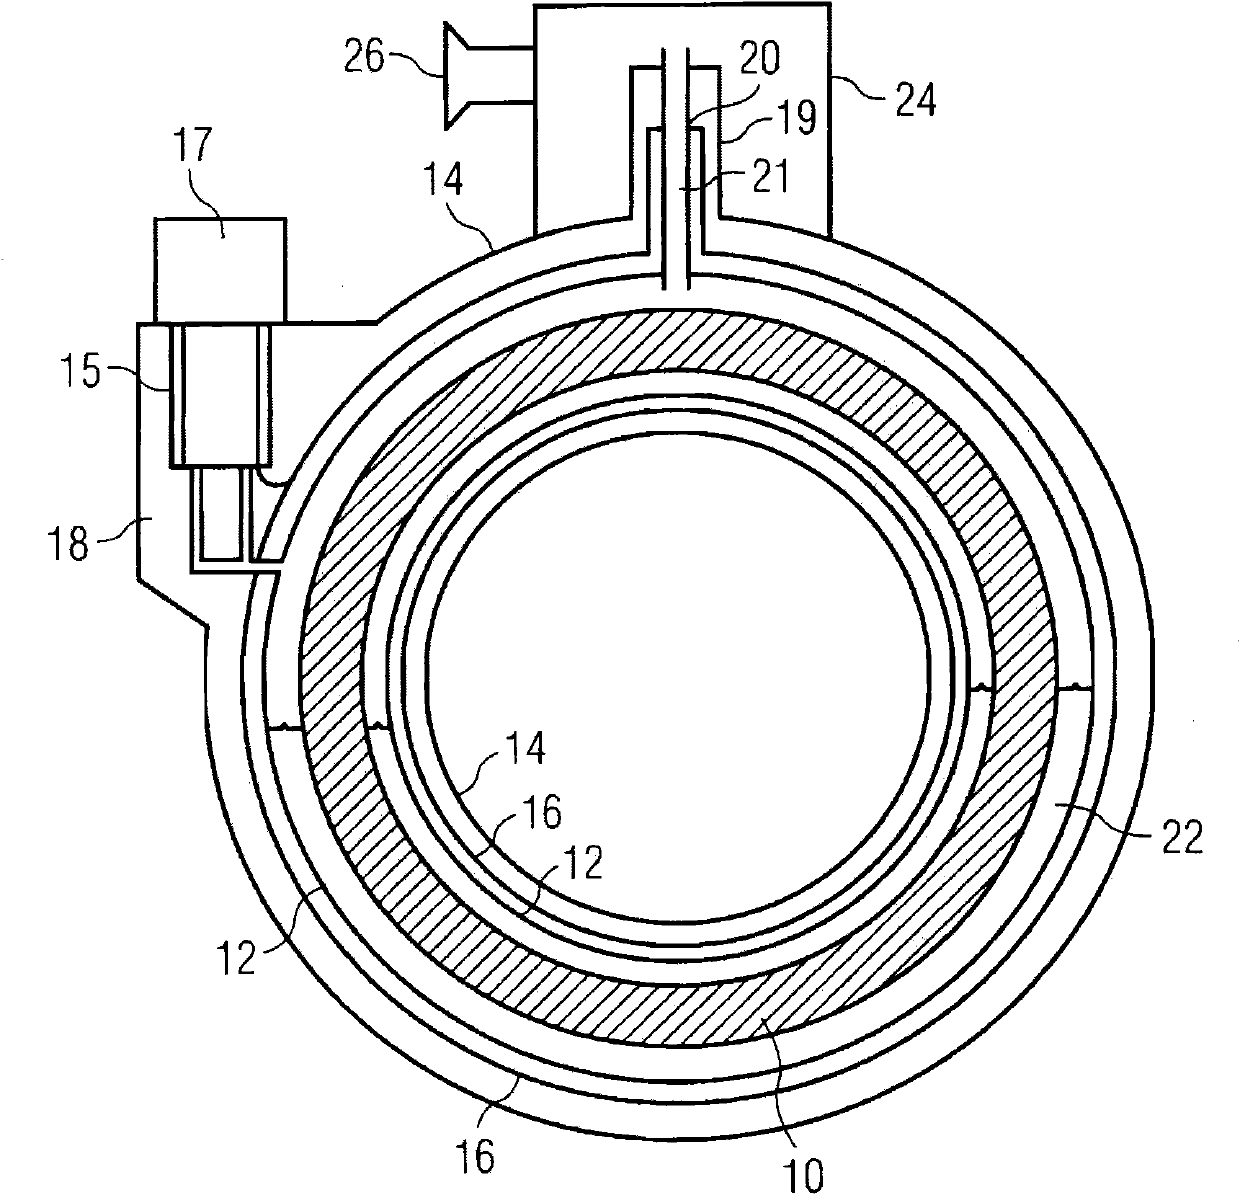 Superconducting magnet cryogen quench path outlet assembly or method